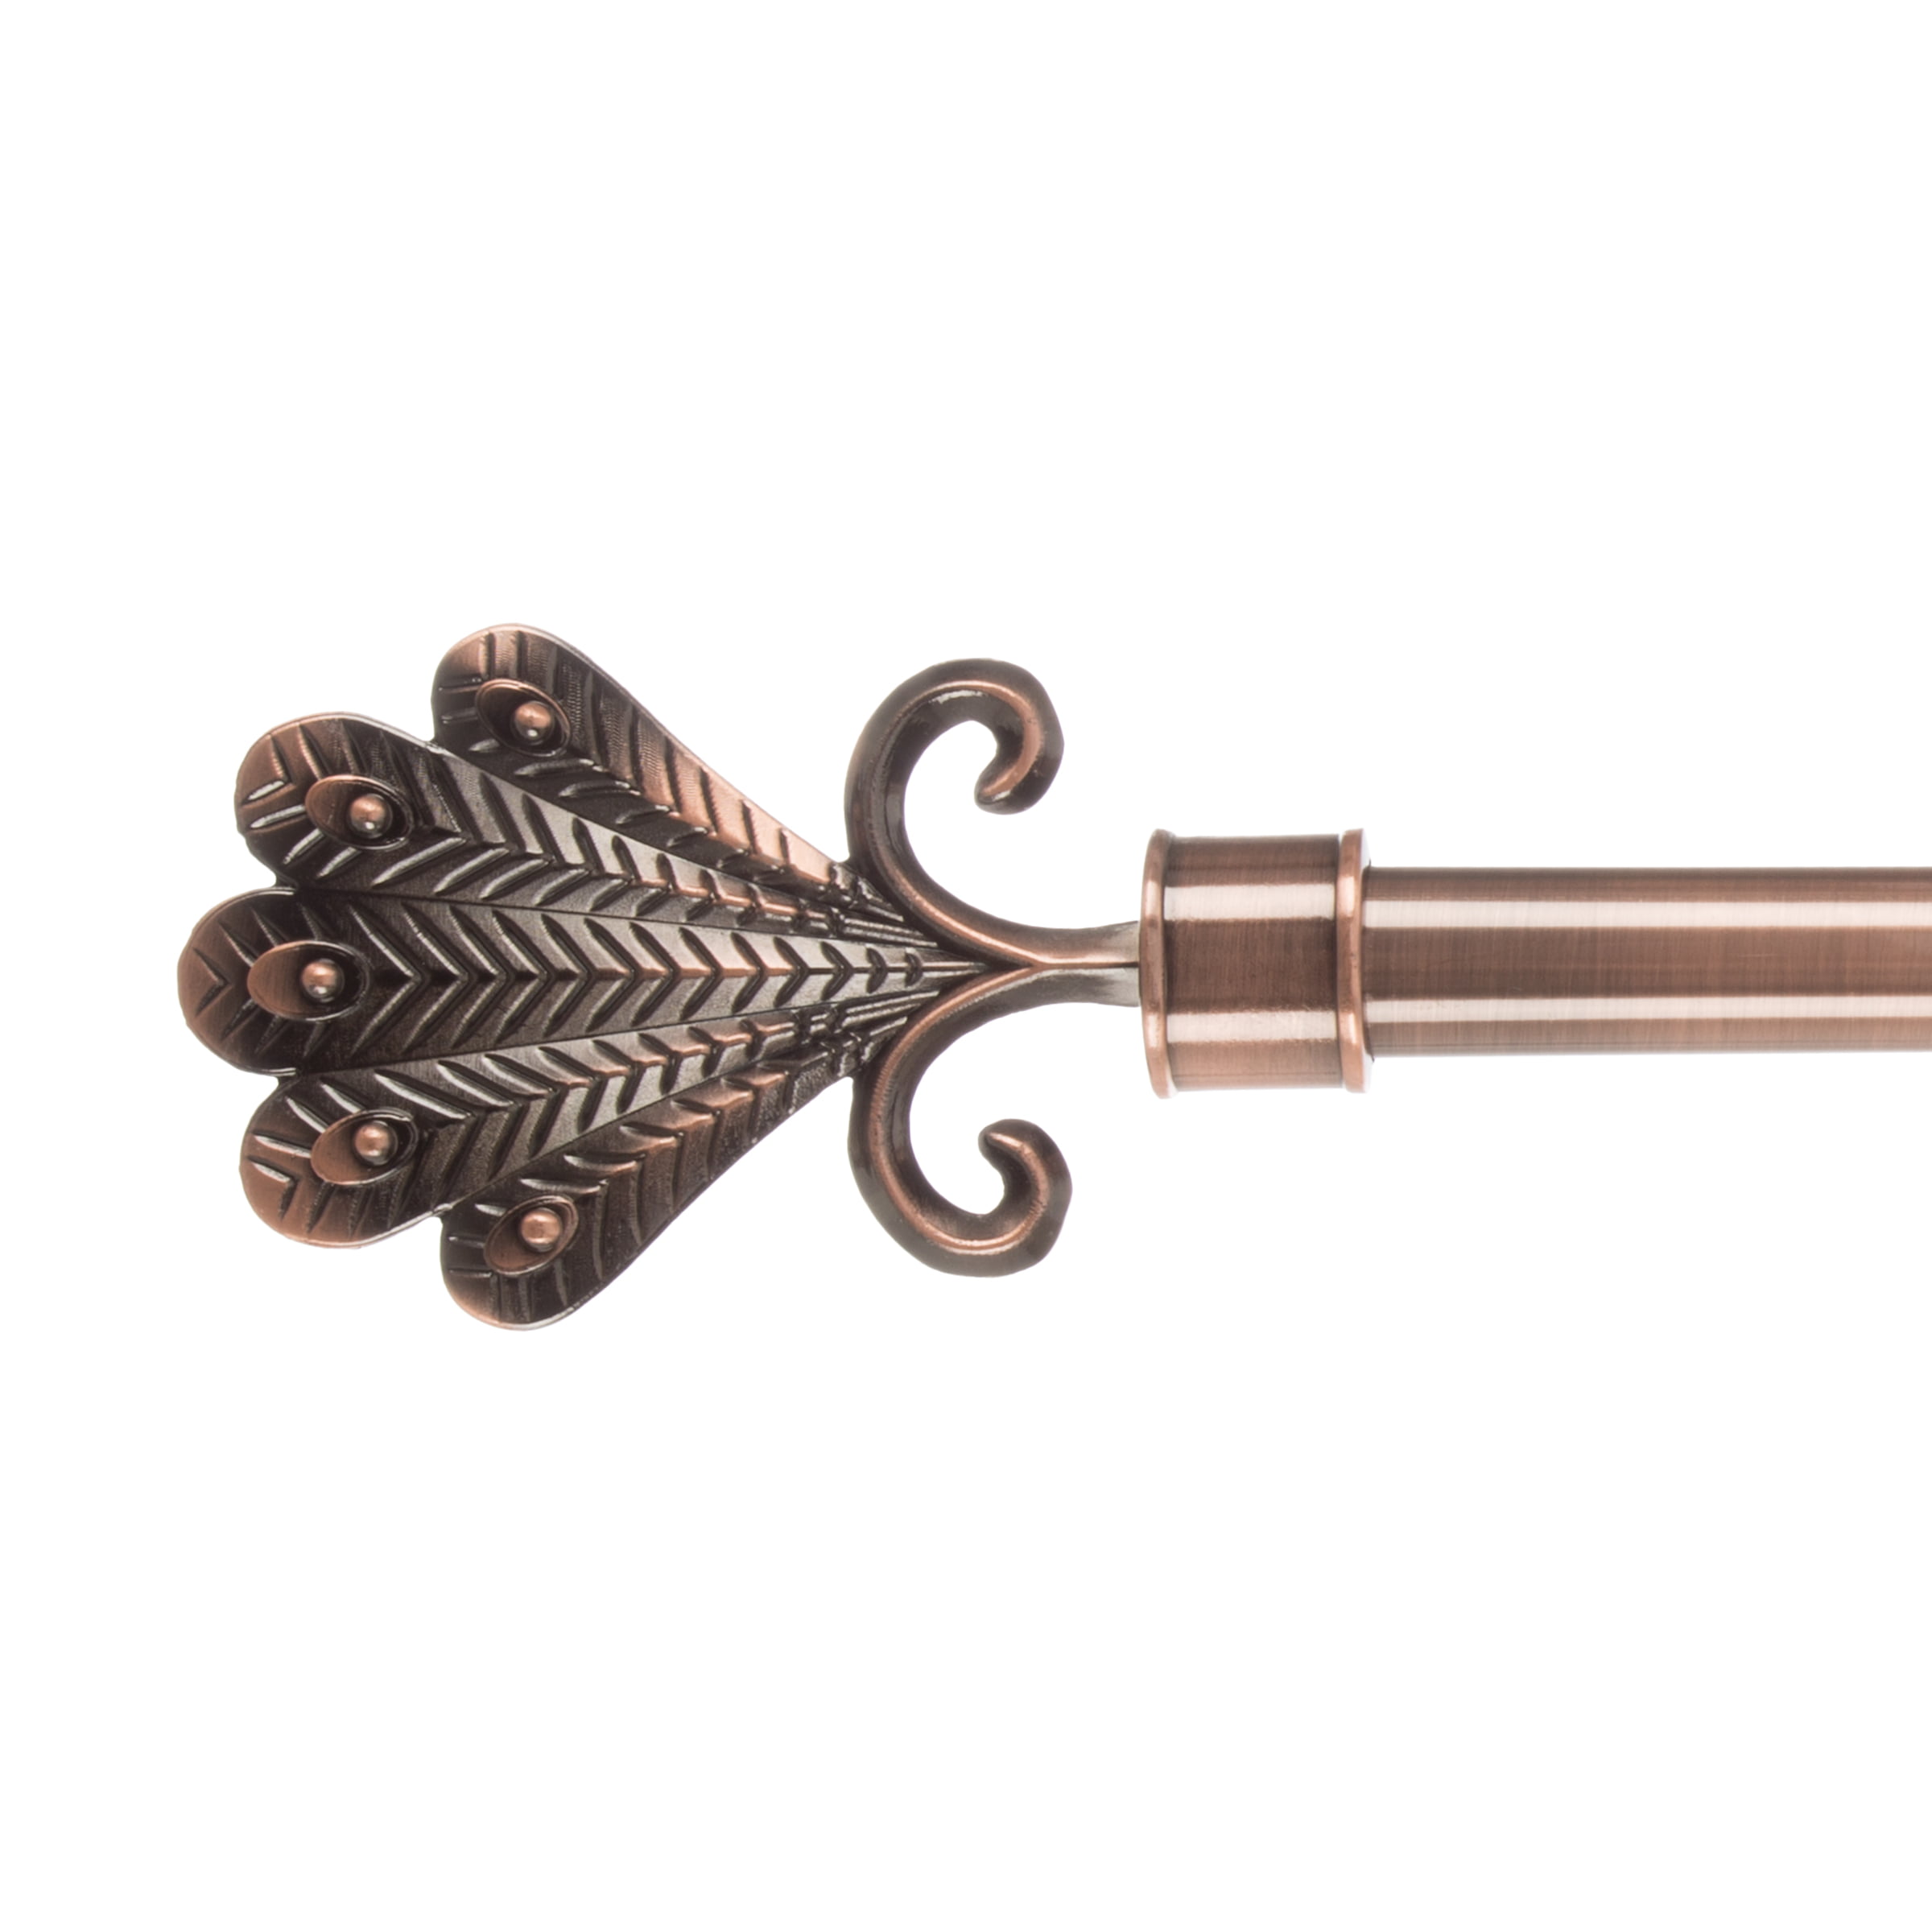 Curtain Hardware Essentials: From Rods To Finials